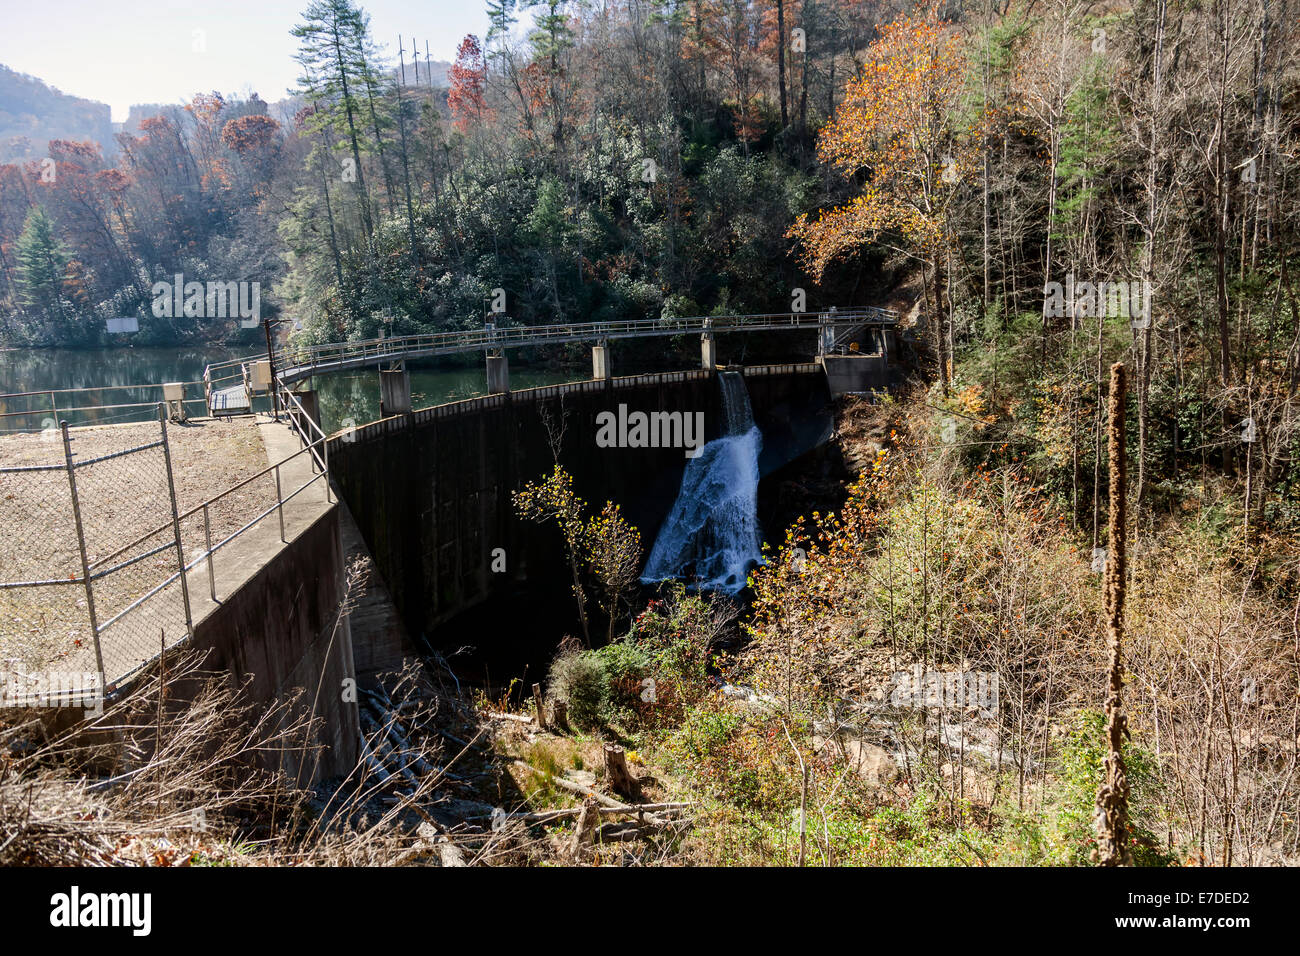 Tuckasegee Lake dam spillway in the West Fork Tuckasegee River along scenic route NC 107 in mountains of SW North Carolina, USA Stock Photo